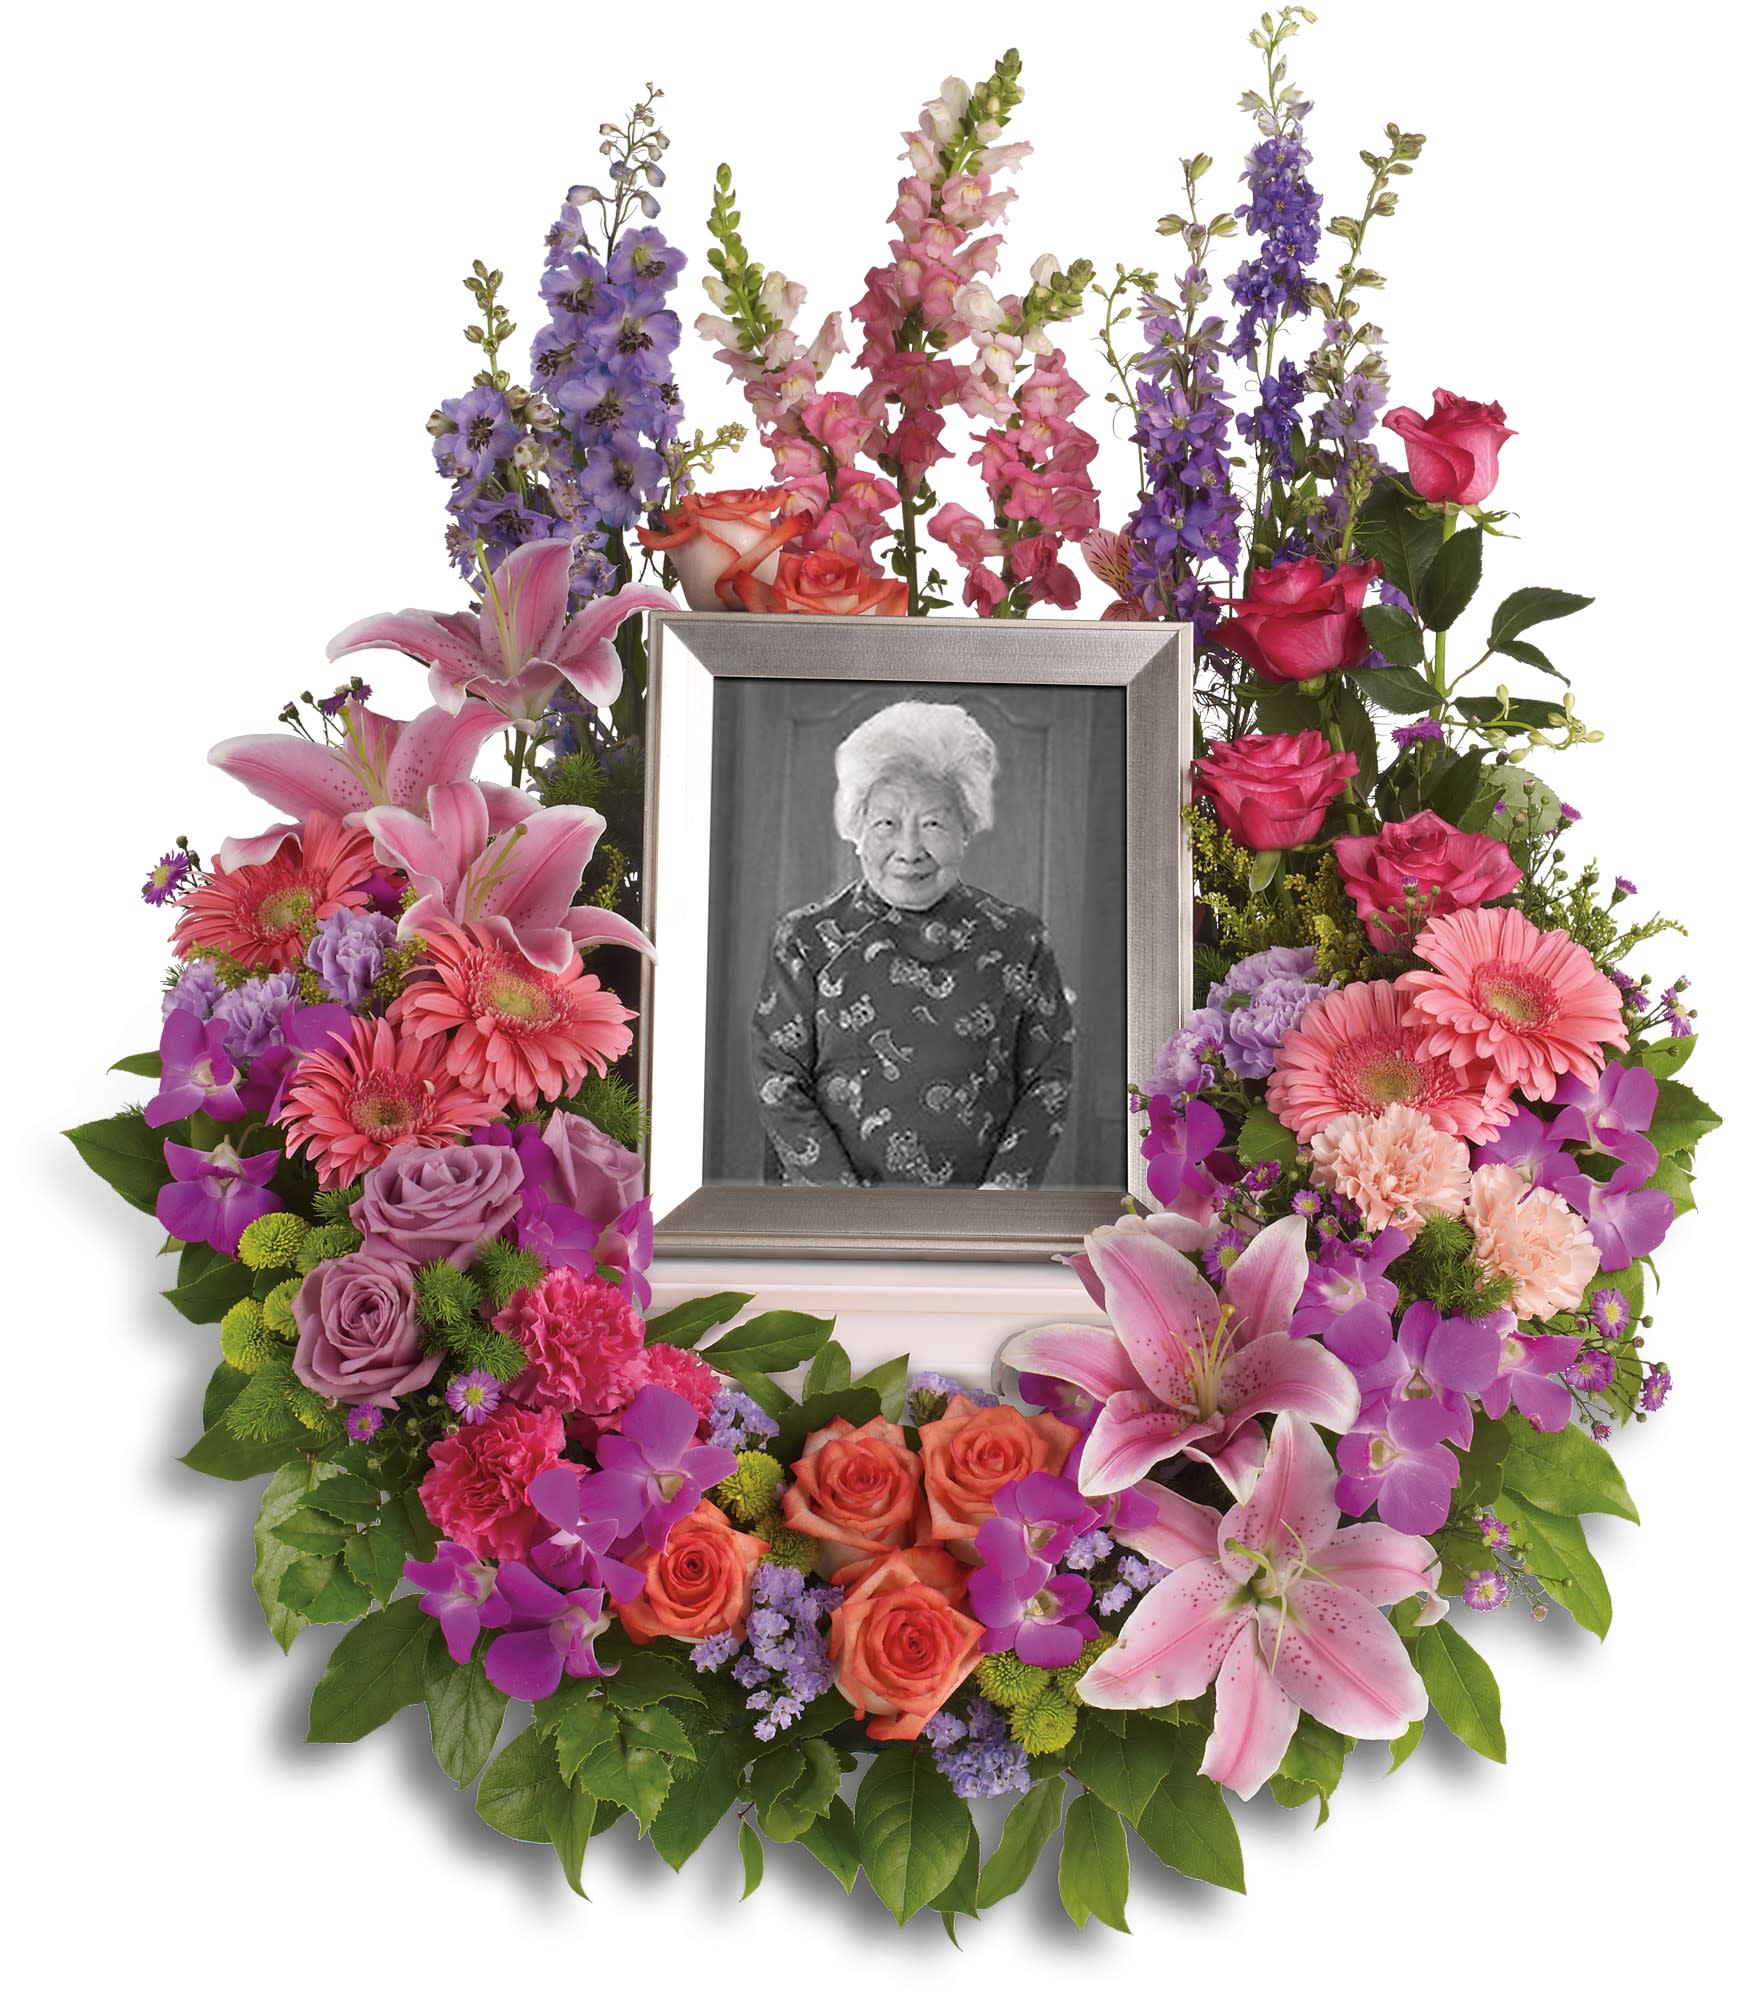 In Memoriam Wreath - Devotion is expressed and beautiful memories cherished with this deep-hued and softly elegant wreath. A lovely reminder of your affection and respect. T253-1A 